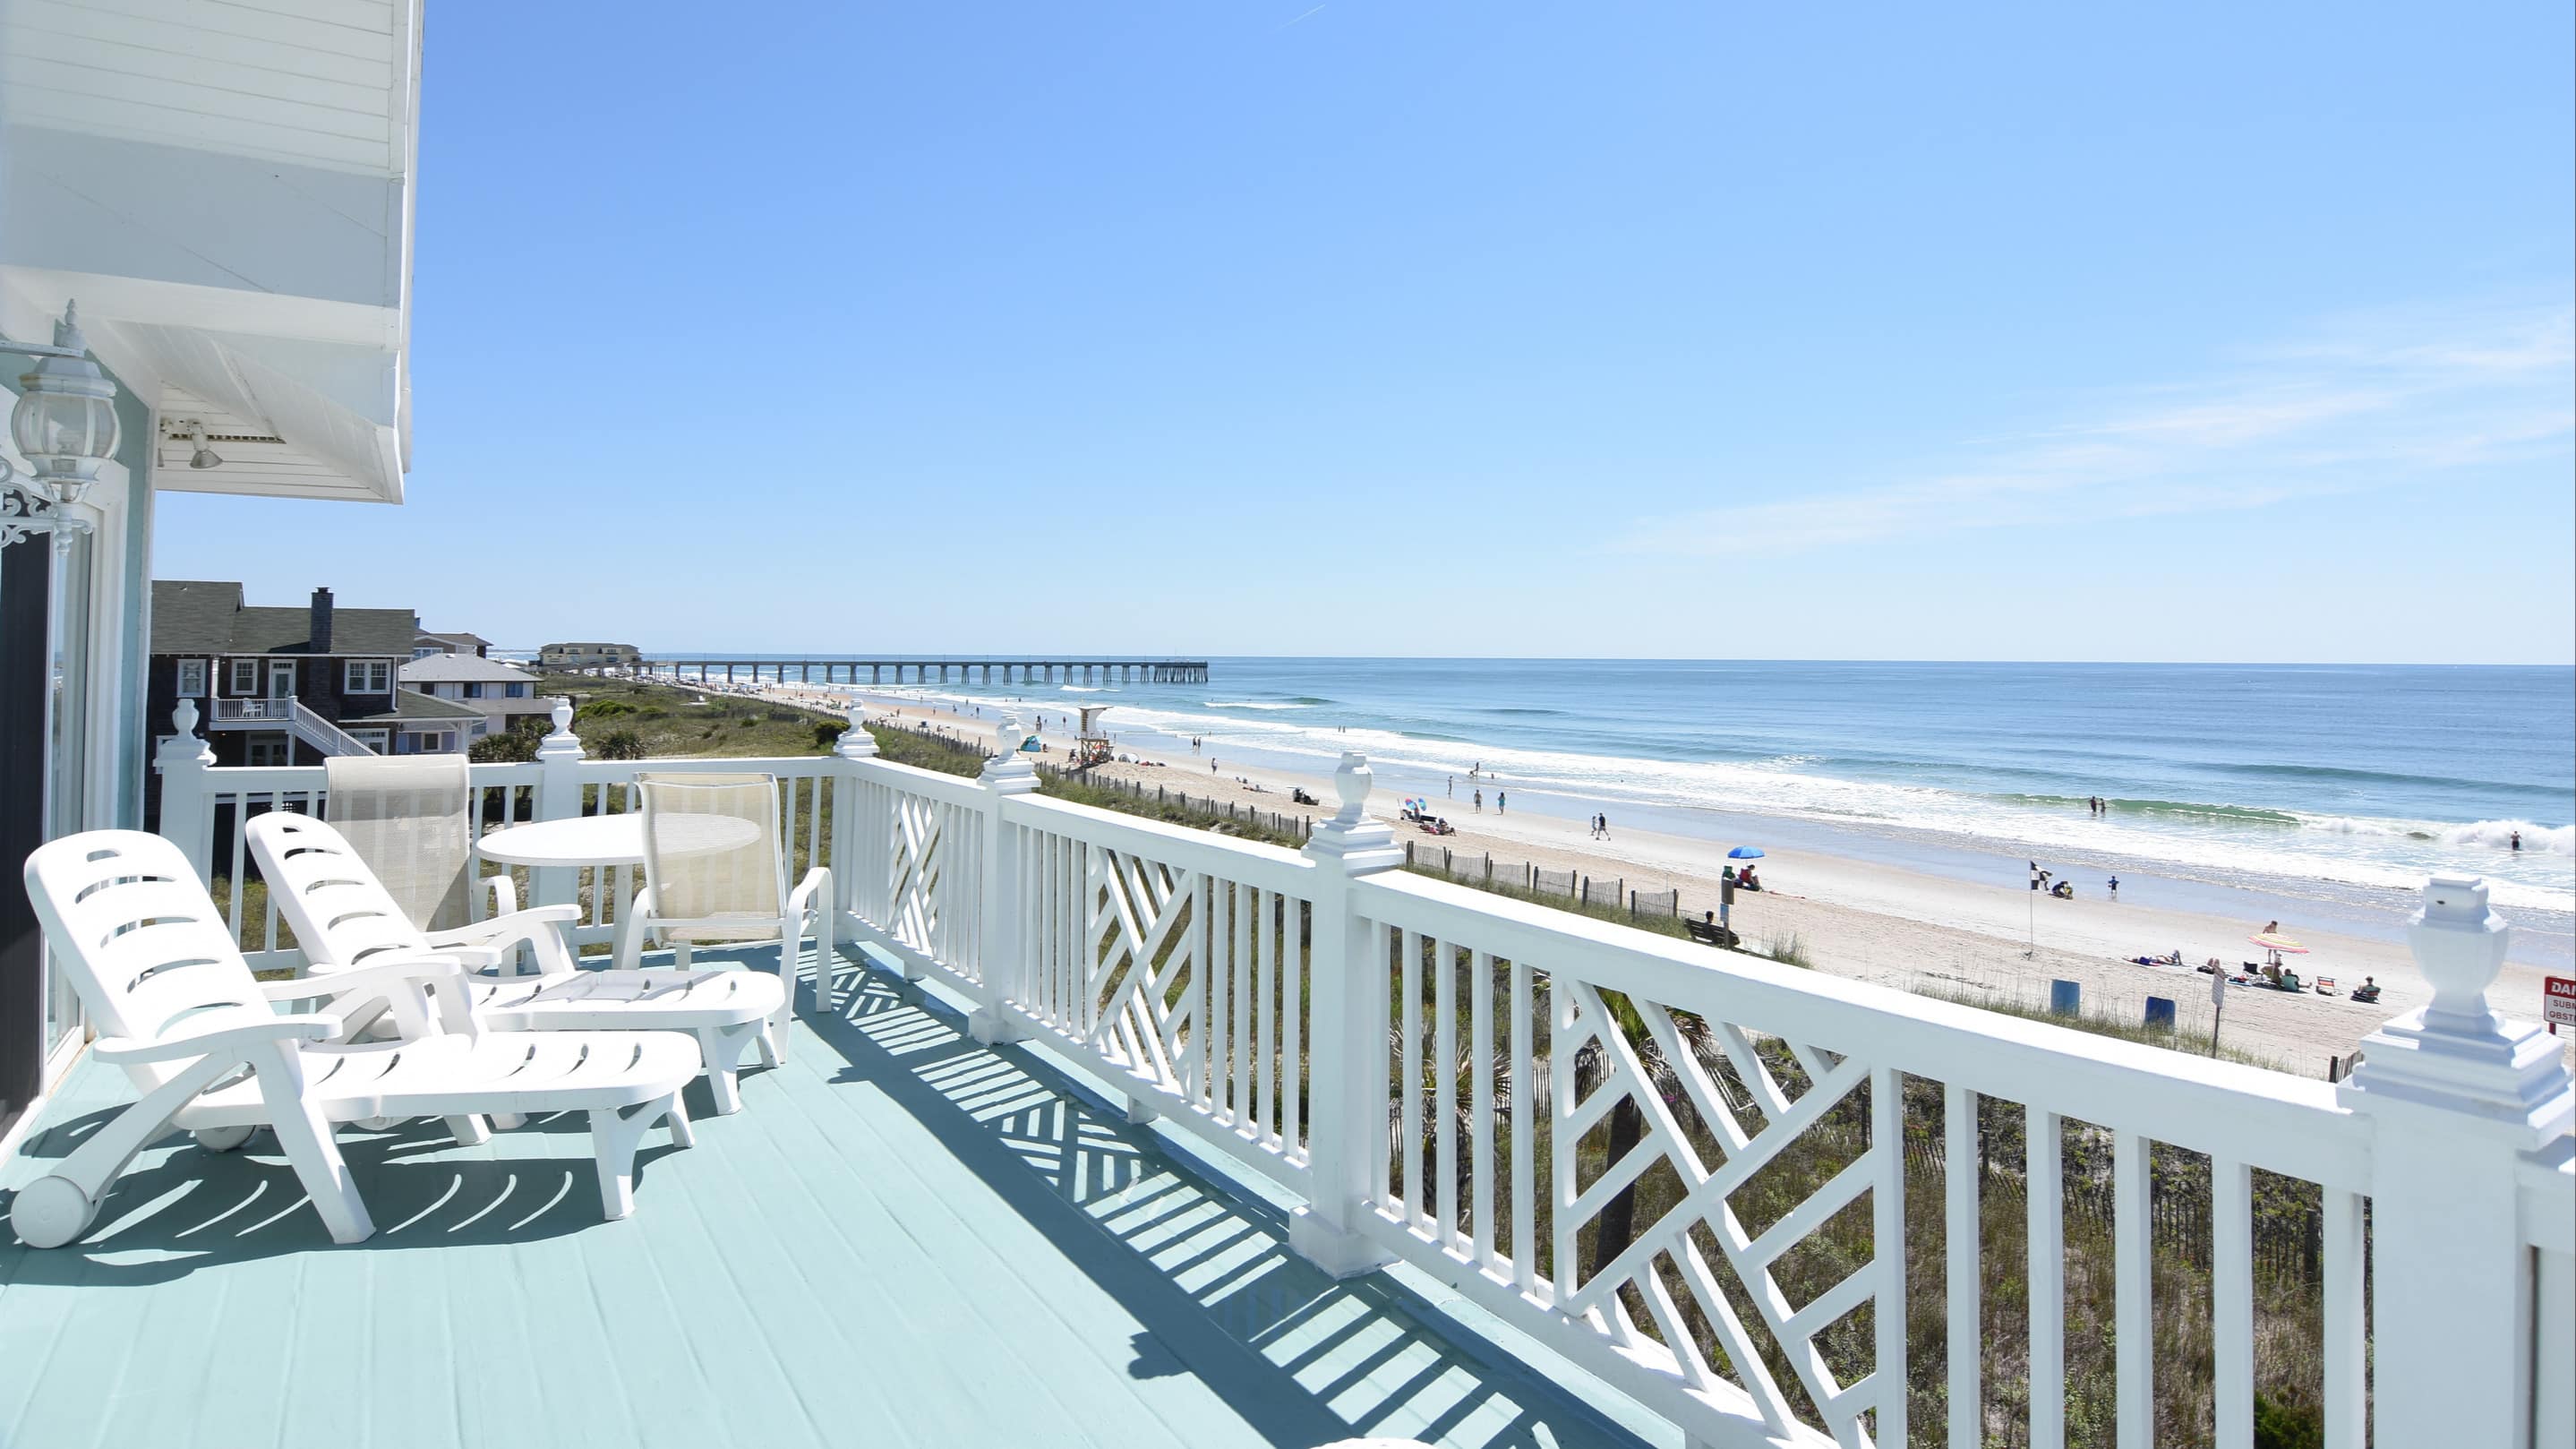 Find this year’s beach house in North Carolina